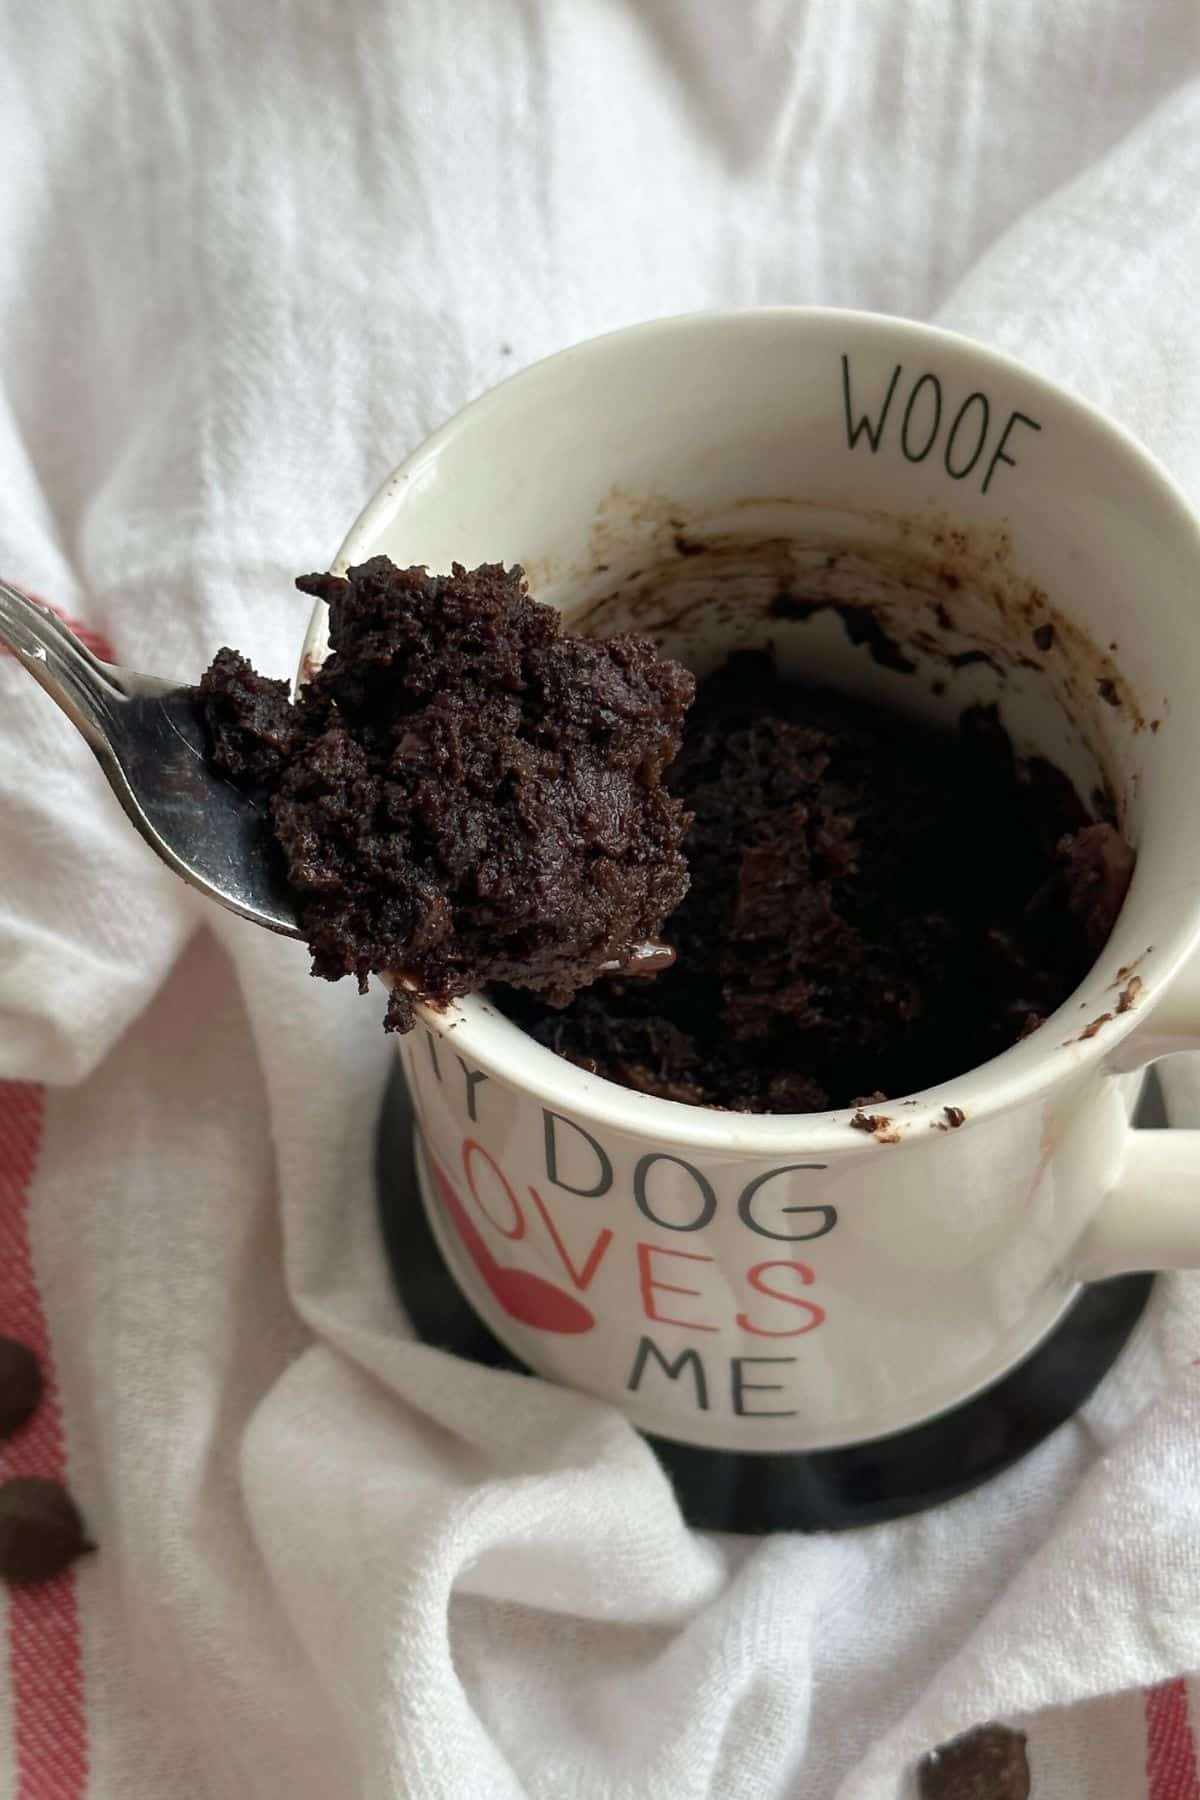 Bite of chocolate zucchini cake on fork lifted out of mug with more cake. White mug with text that reads "WOOF" on lip. On top of white cloth napkin with red stripes.